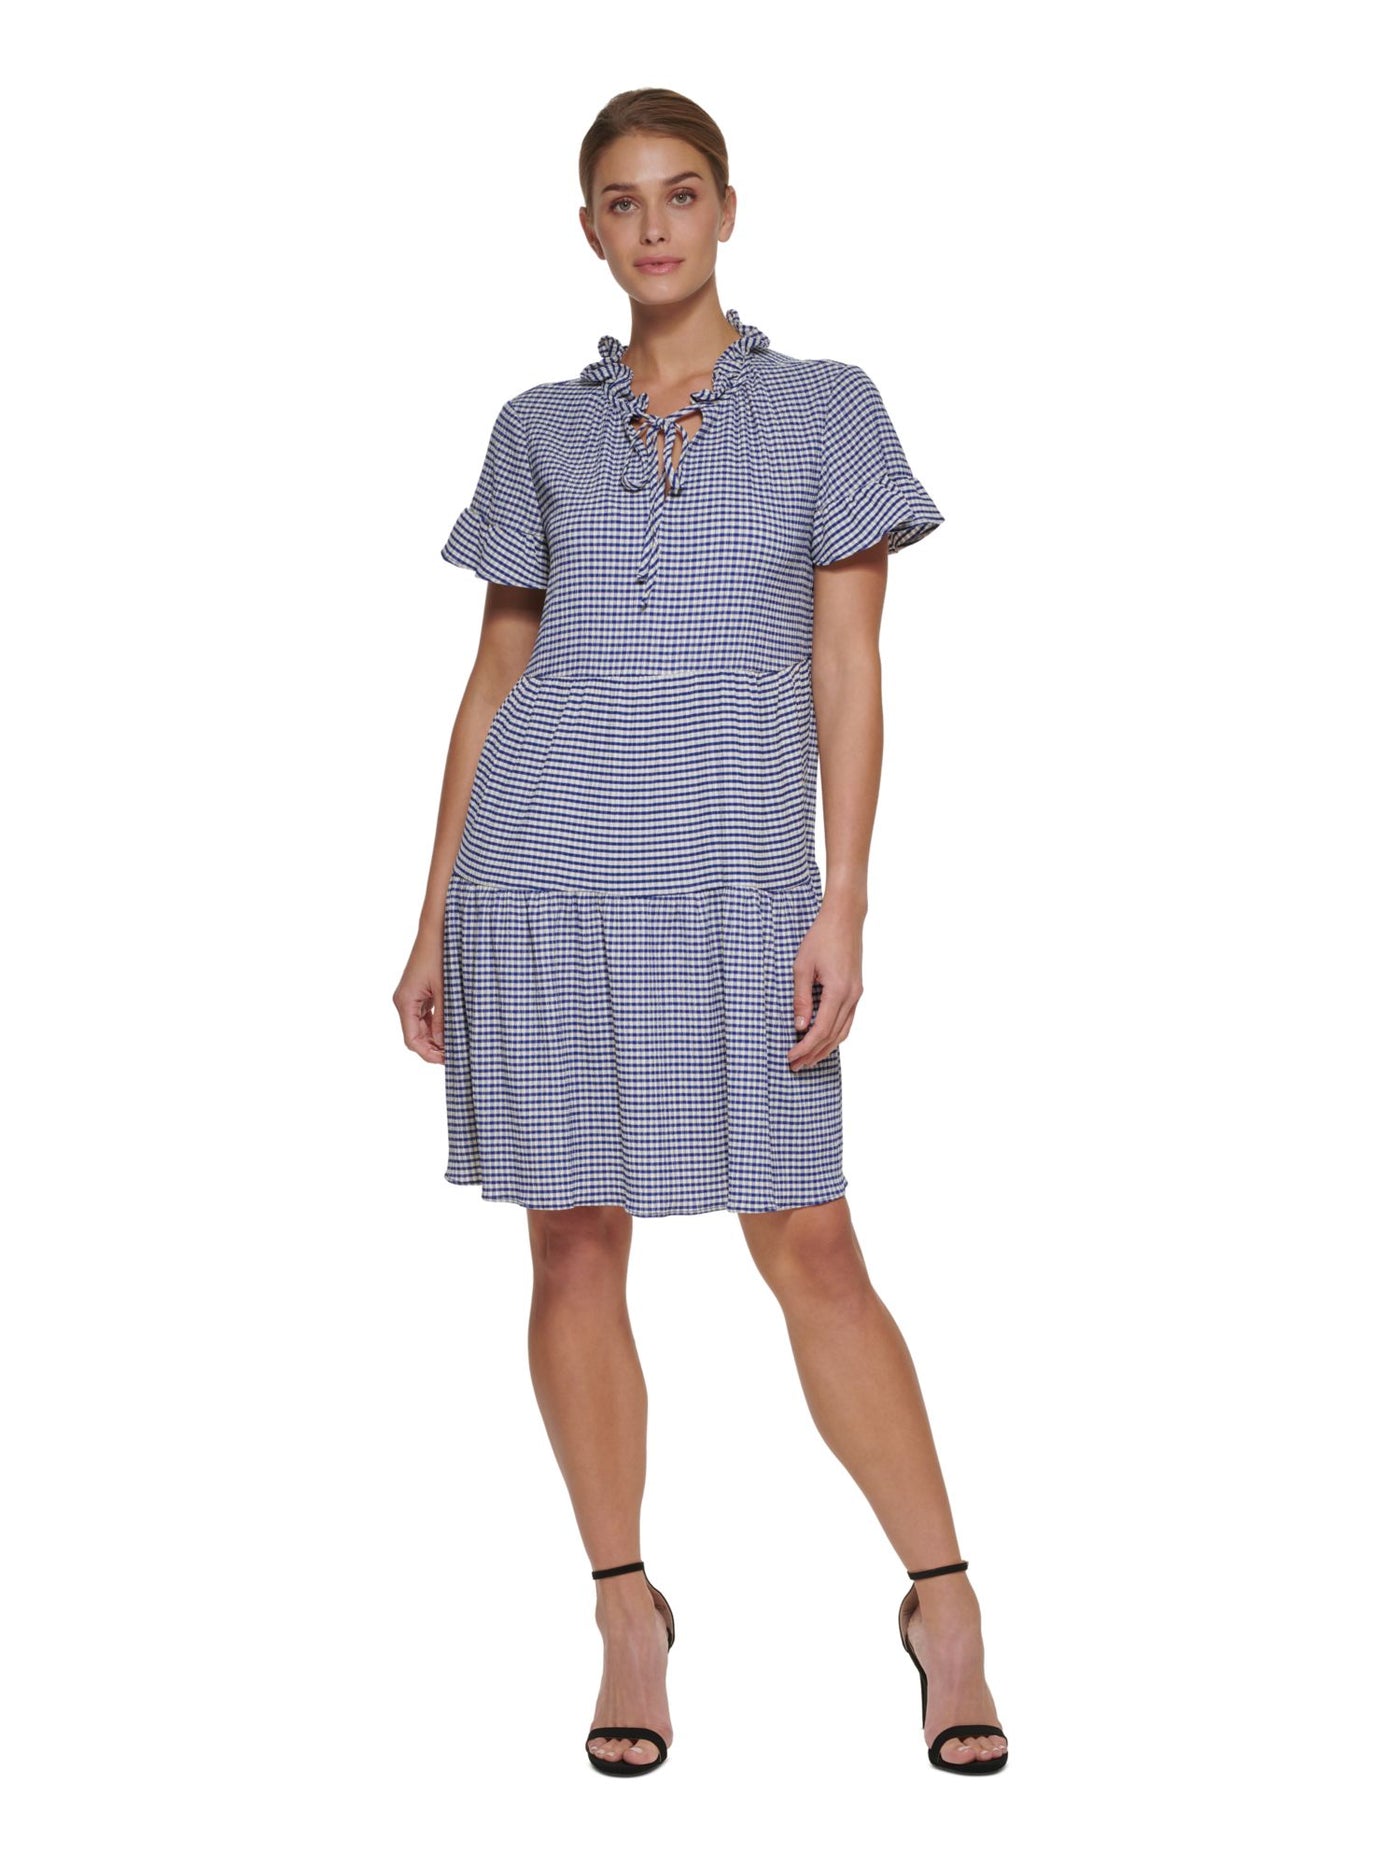 DKNY Womens Blue Ruffled Pullover Gingham Short Sleeve Tie Neck Above The Knee Wear To Work Sheath Dress 10